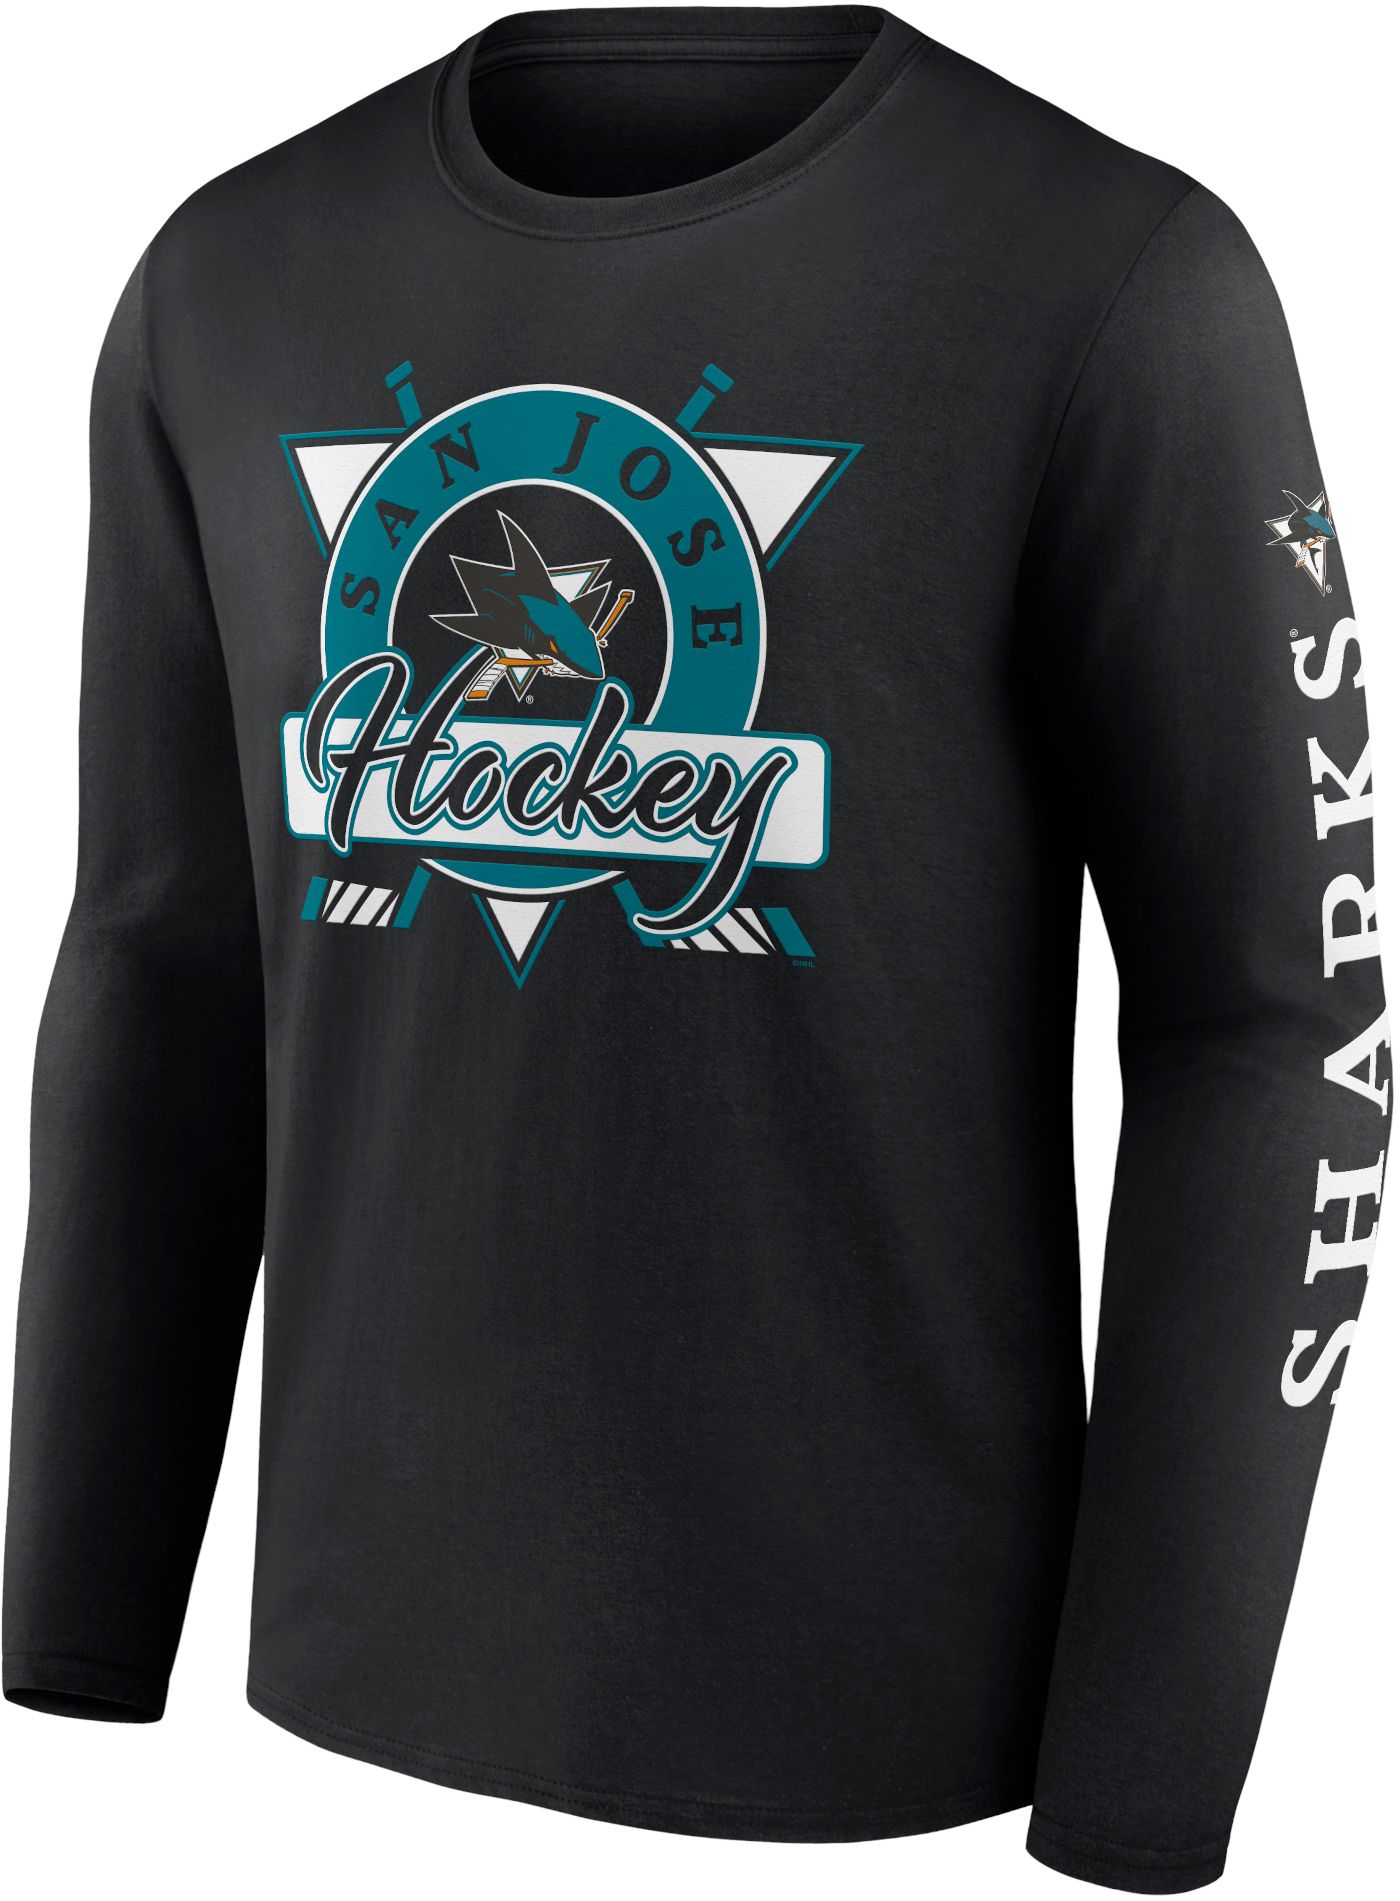 Outerstuff NHL Youth San Jose Sharks '22-'23 Special Edition Premier Blank Jersey - S/M Each